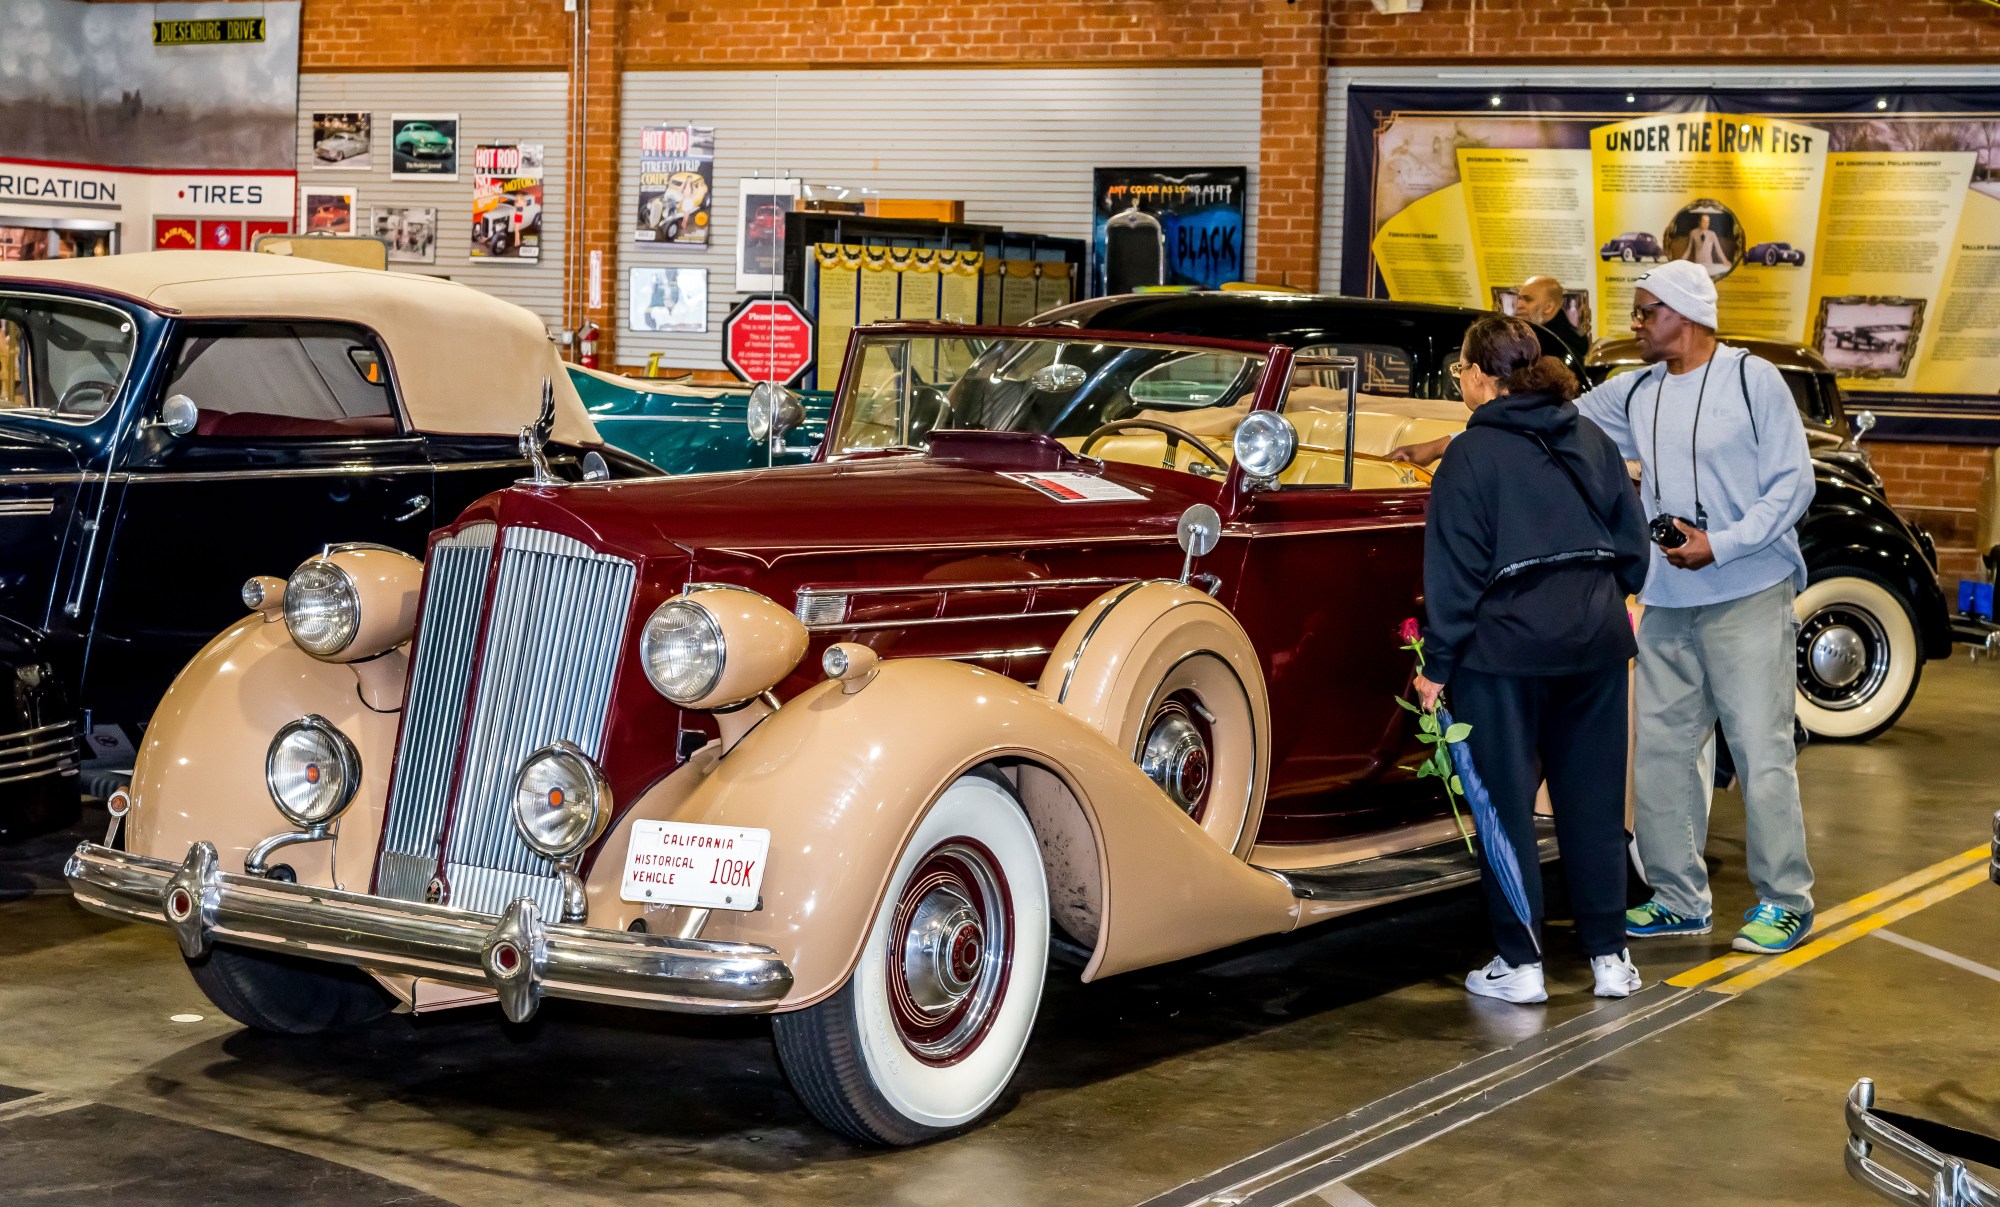 The Zimmerman Automobile Driving Museum in El Segundo will have a free event featuring classic and custom cars on March 23. (Photo by Gil Castro-Petres, Contributing Photographer)